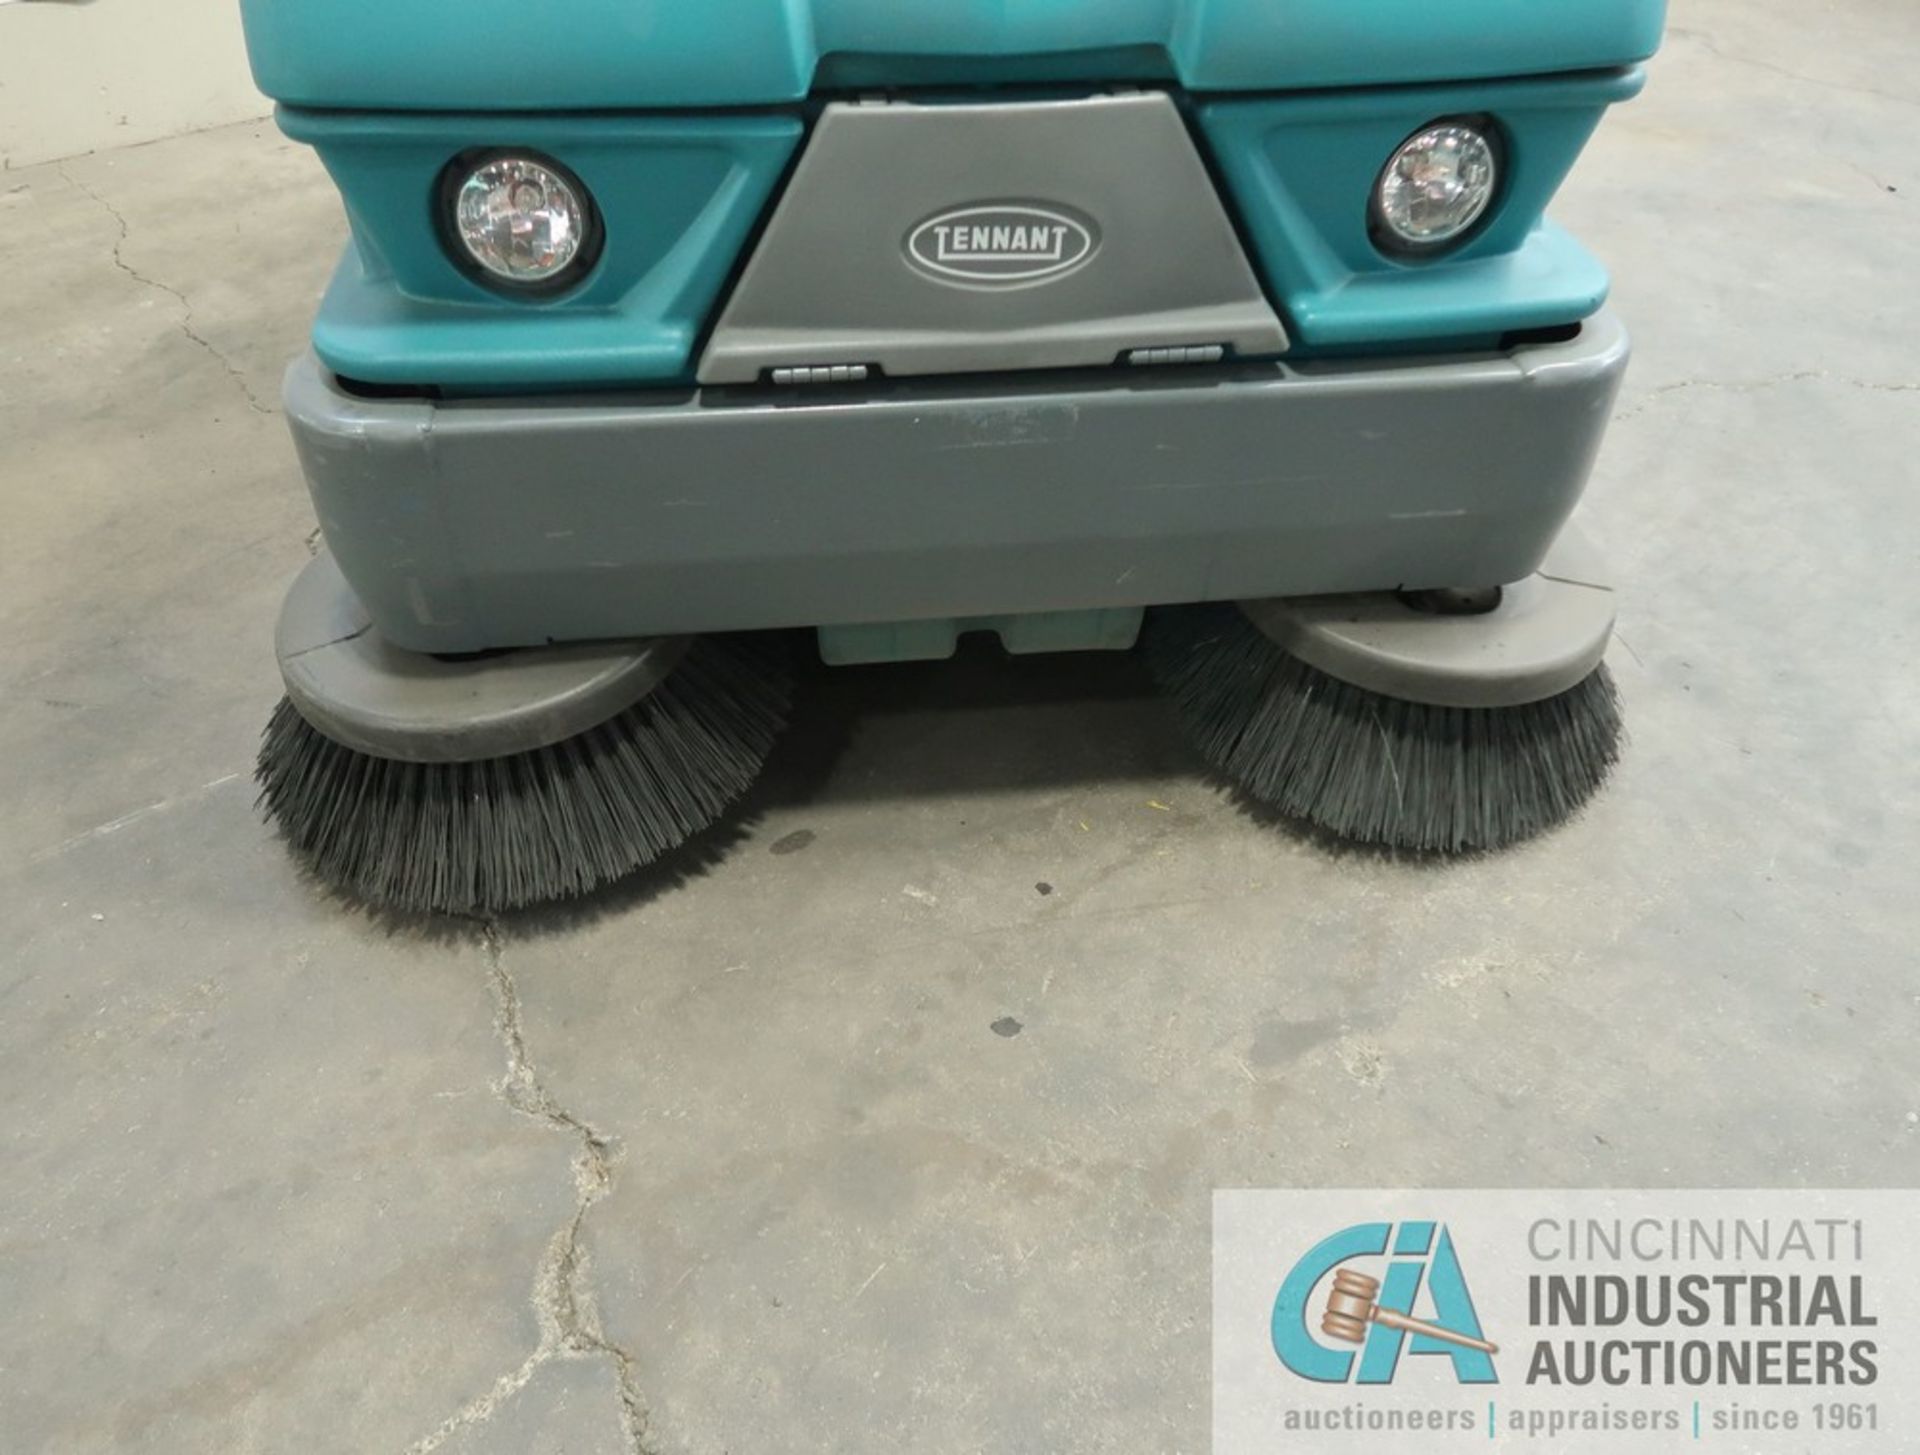 2017 TENNANT MODEL S20 RIDER TYPE FLOOR SCRUBBER; S/N S20-5620, 70 HOURS SHOWING - Image 3 of 12